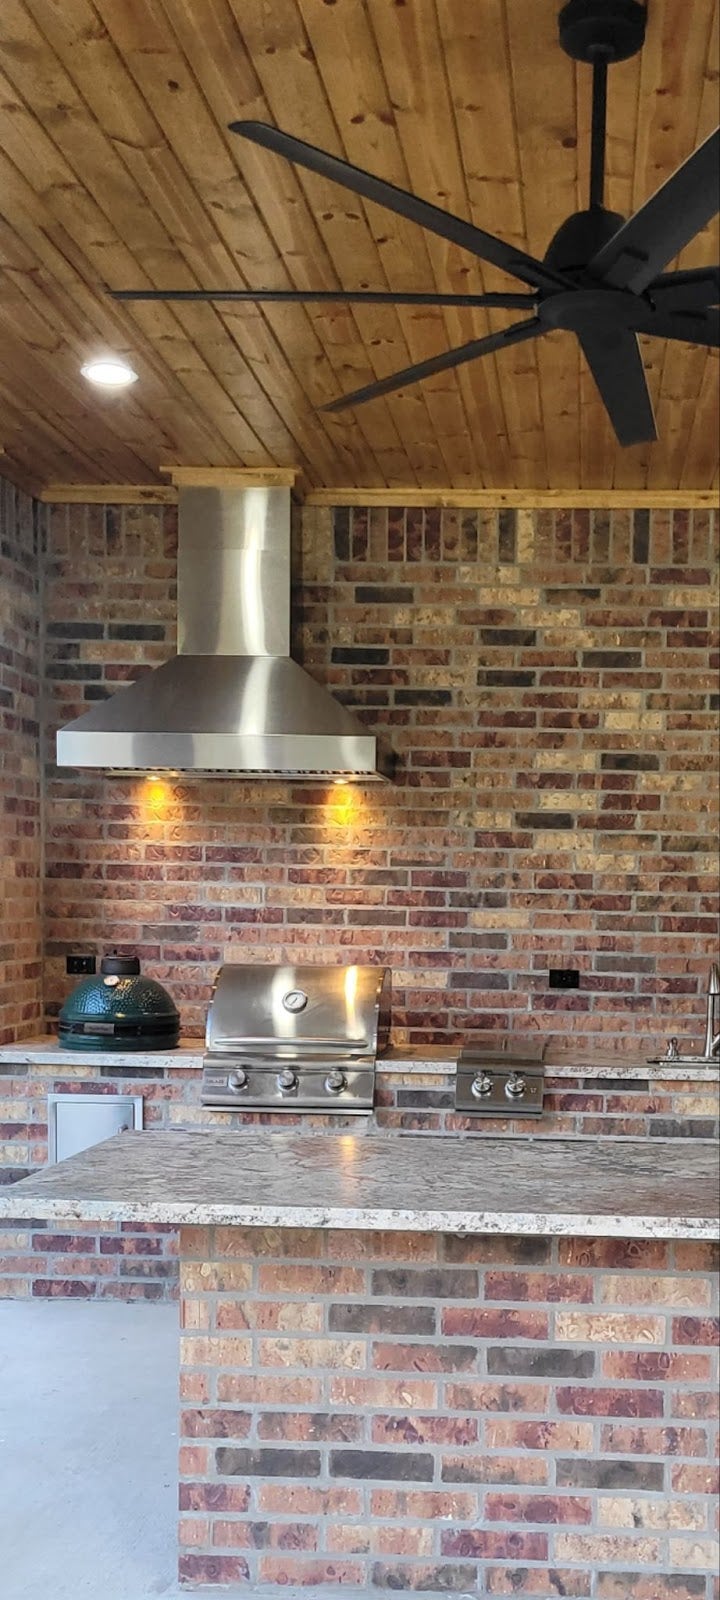 Rustic yet modern outdoor kitchen featuring a brick wall, stainless steel grill and smoker, under a wooden ceiling with a large fan. - Proline Range Hoods - prolinerangehoods.com 